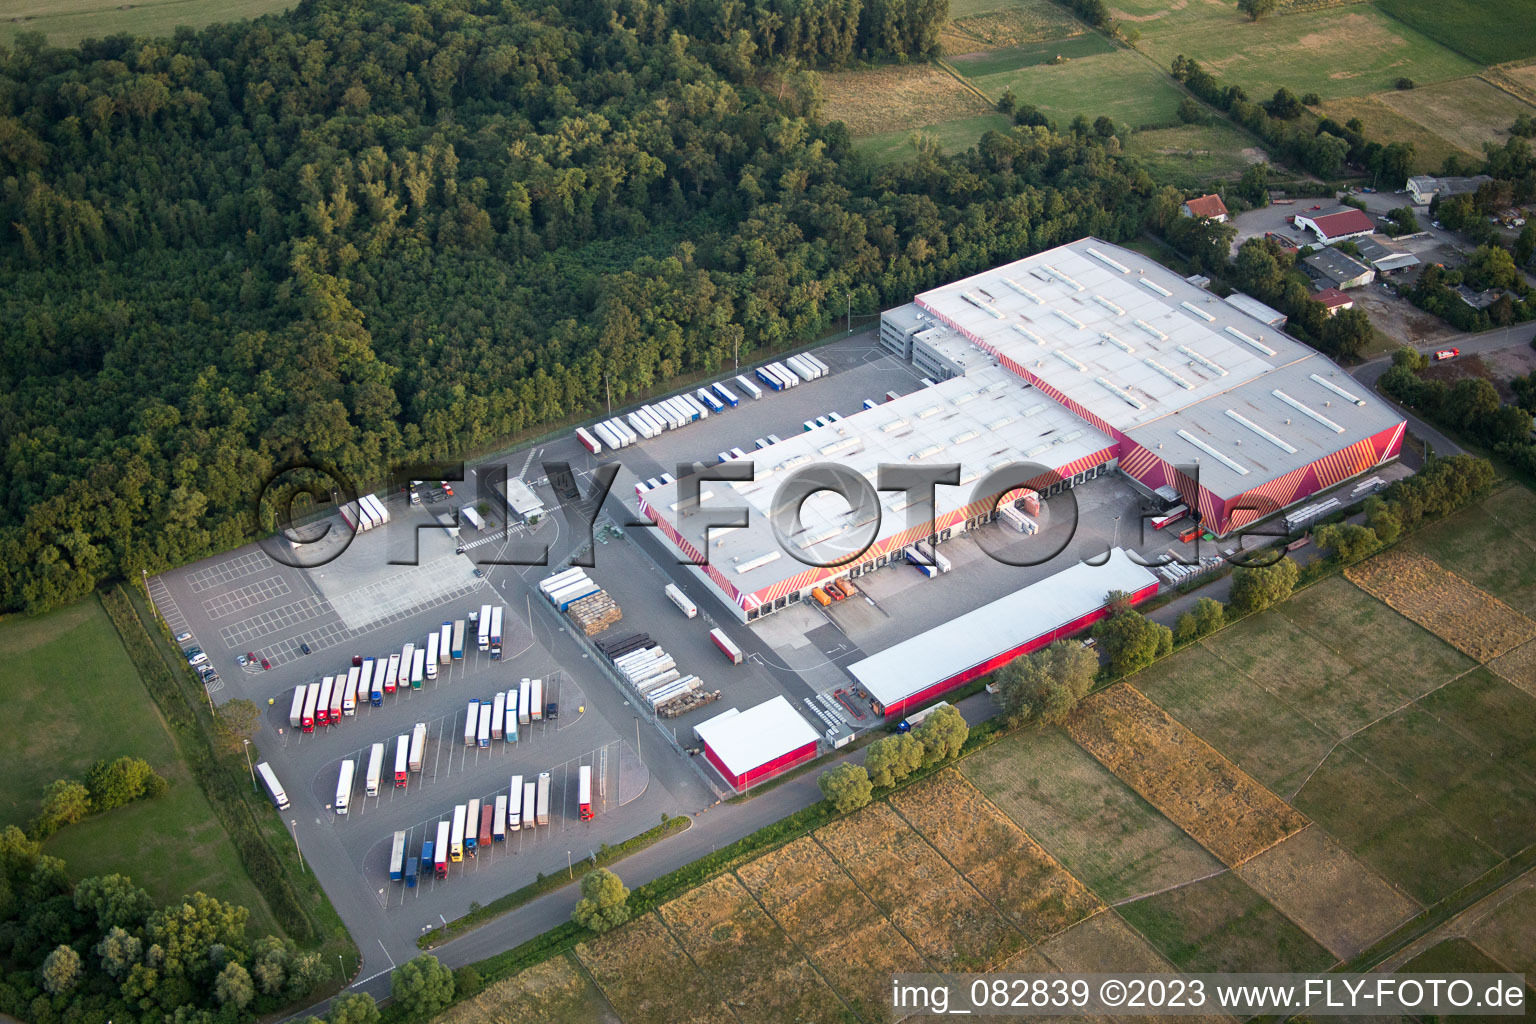 Hornbach logistics center in Essingen in the state Rhineland-Palatinate, Germany